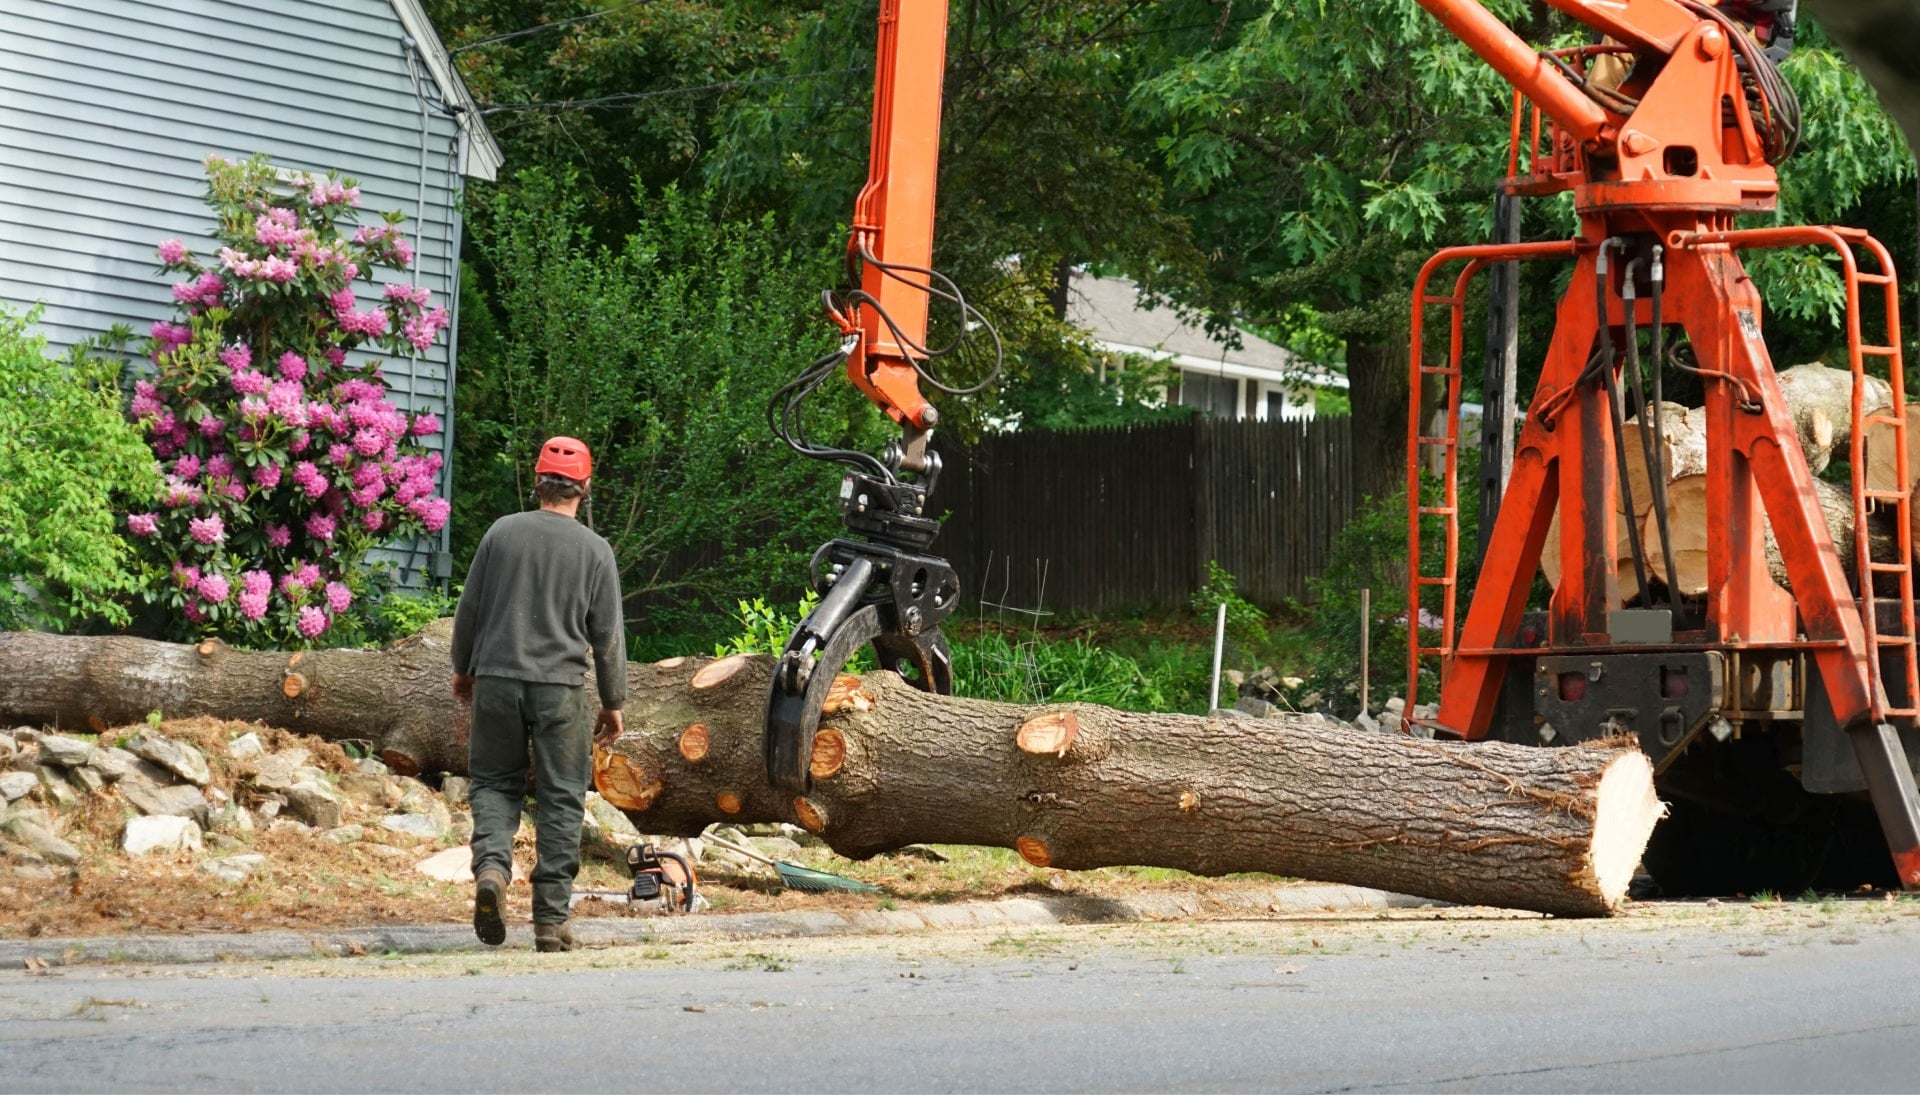 Local partner for Tree removal services in Raleigh